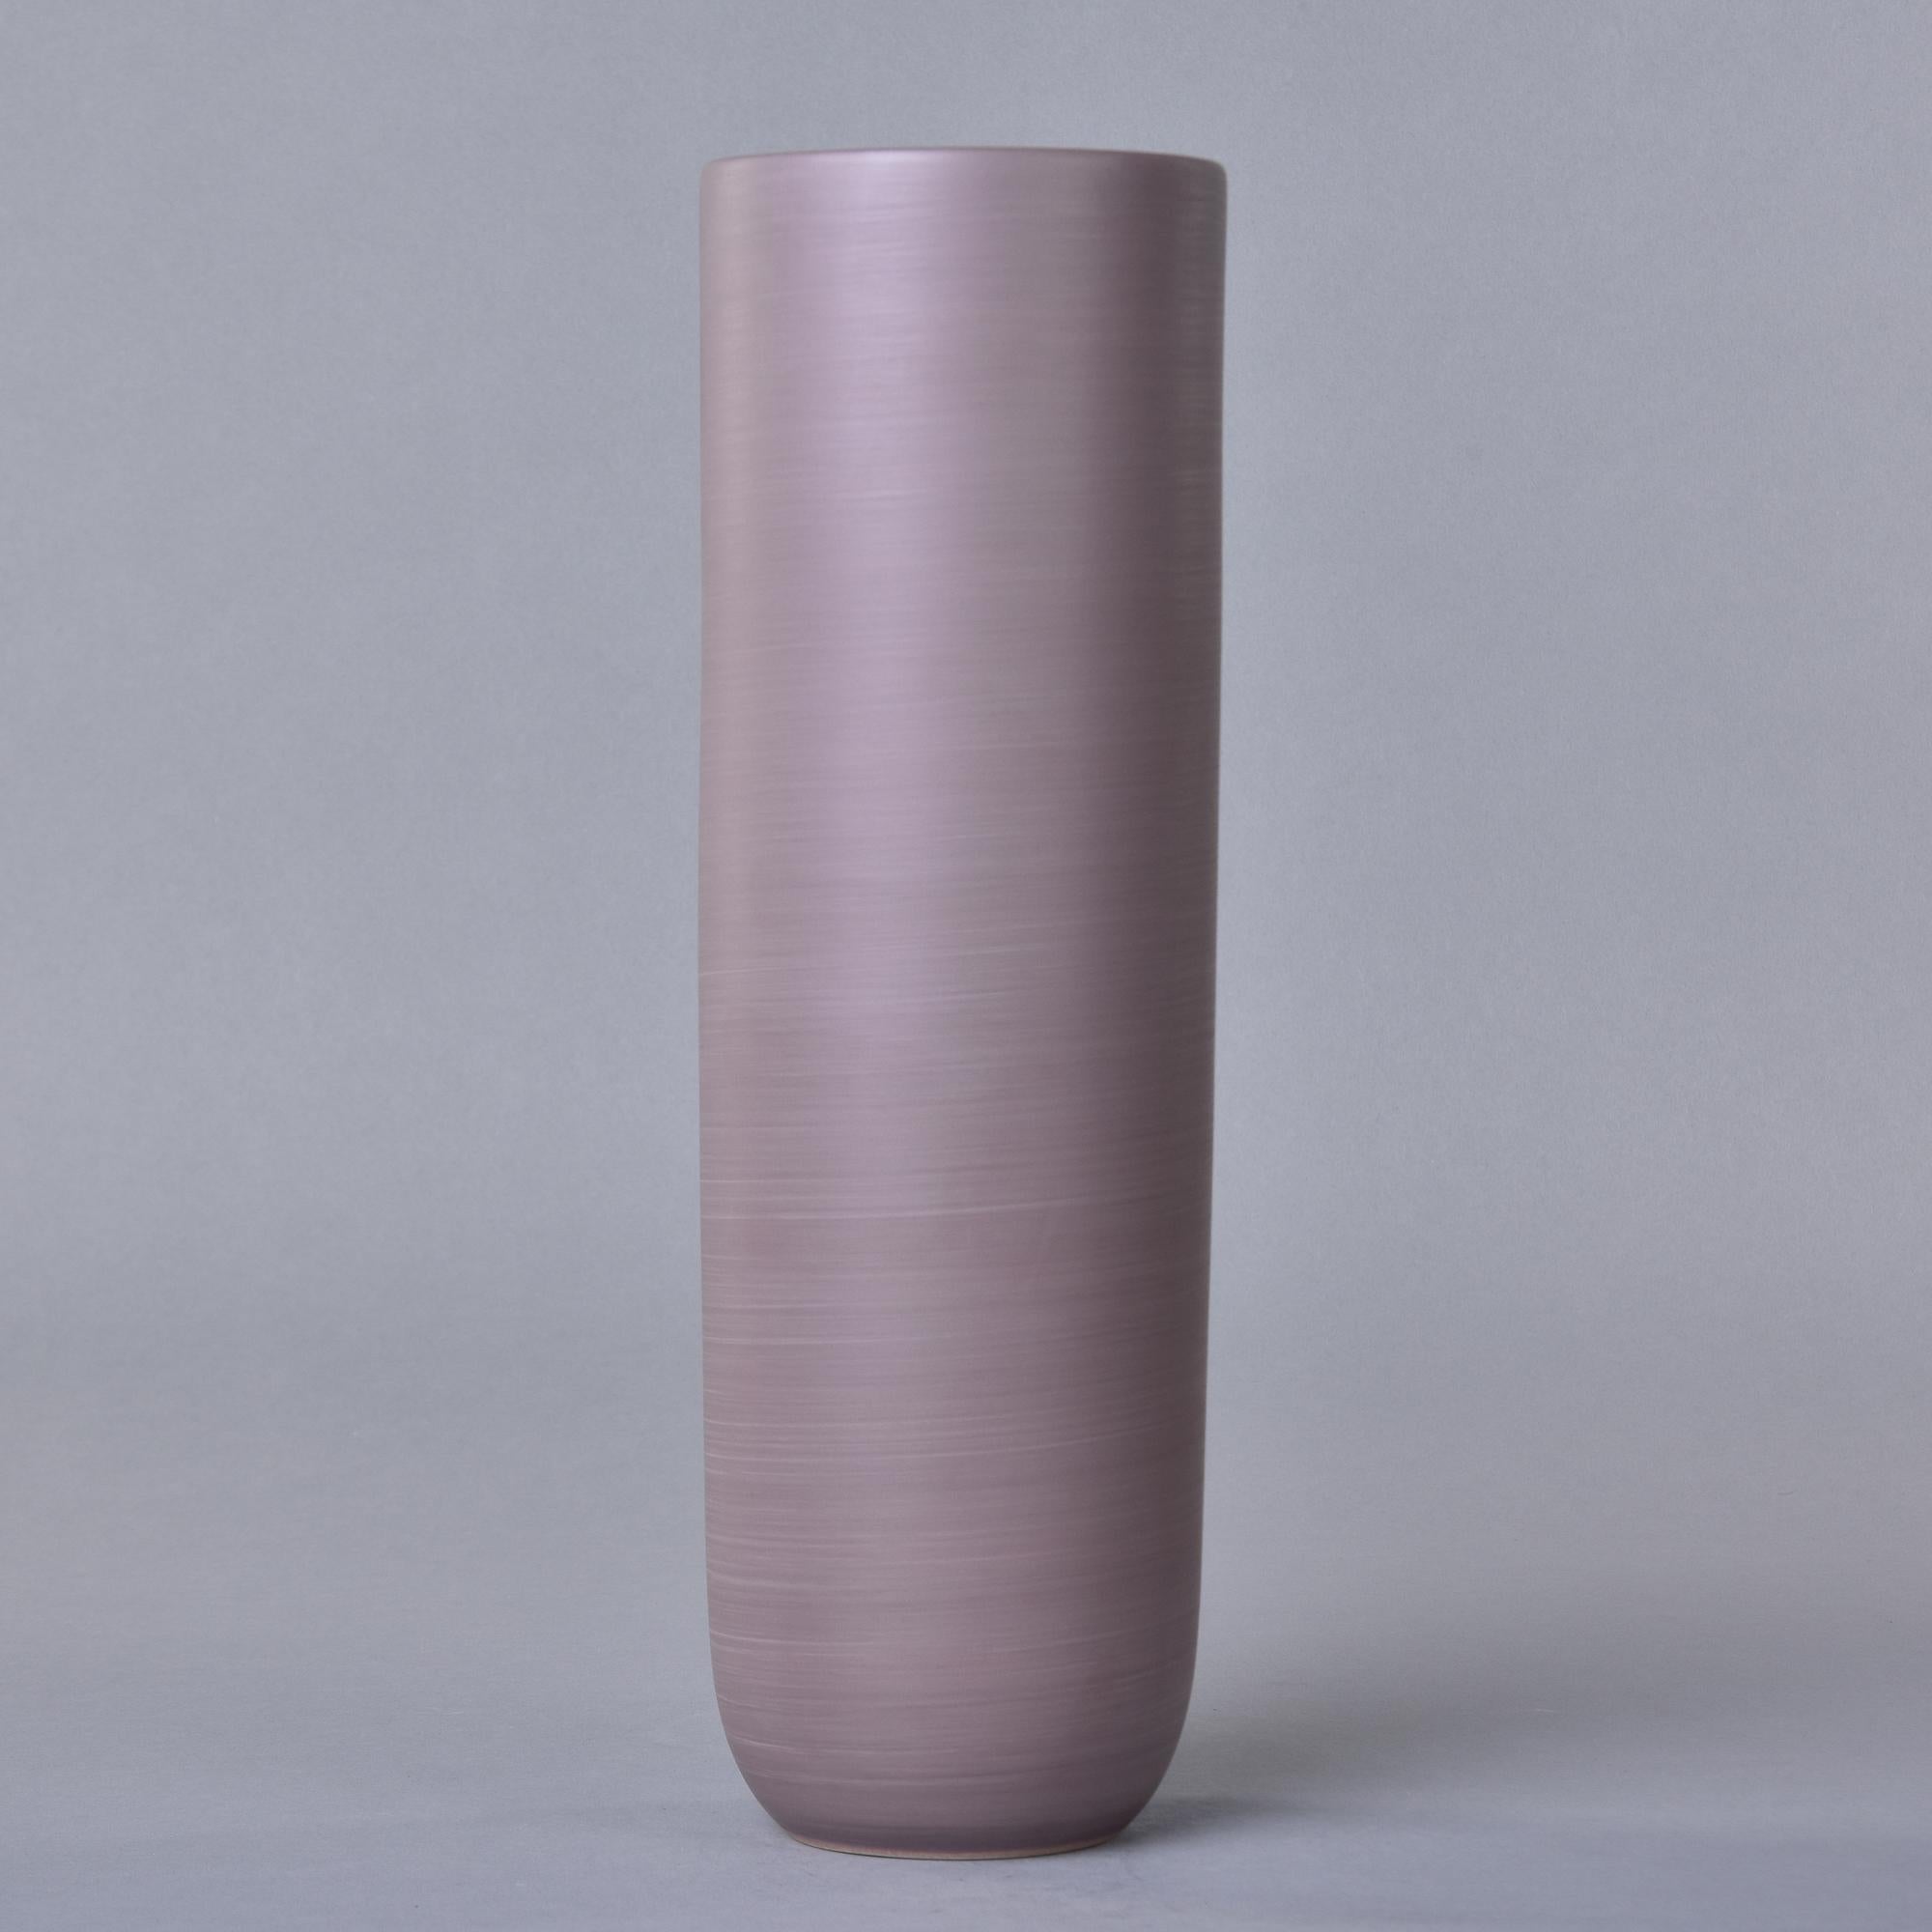 New and made in Italy by Rina Menardi, this ceramic vase is 14” tall. Exterior is glazed in a matte finish smoky lavender with a matte black interior. Signed by the maker on underside of base. At the time of this posting, we have several other Rina